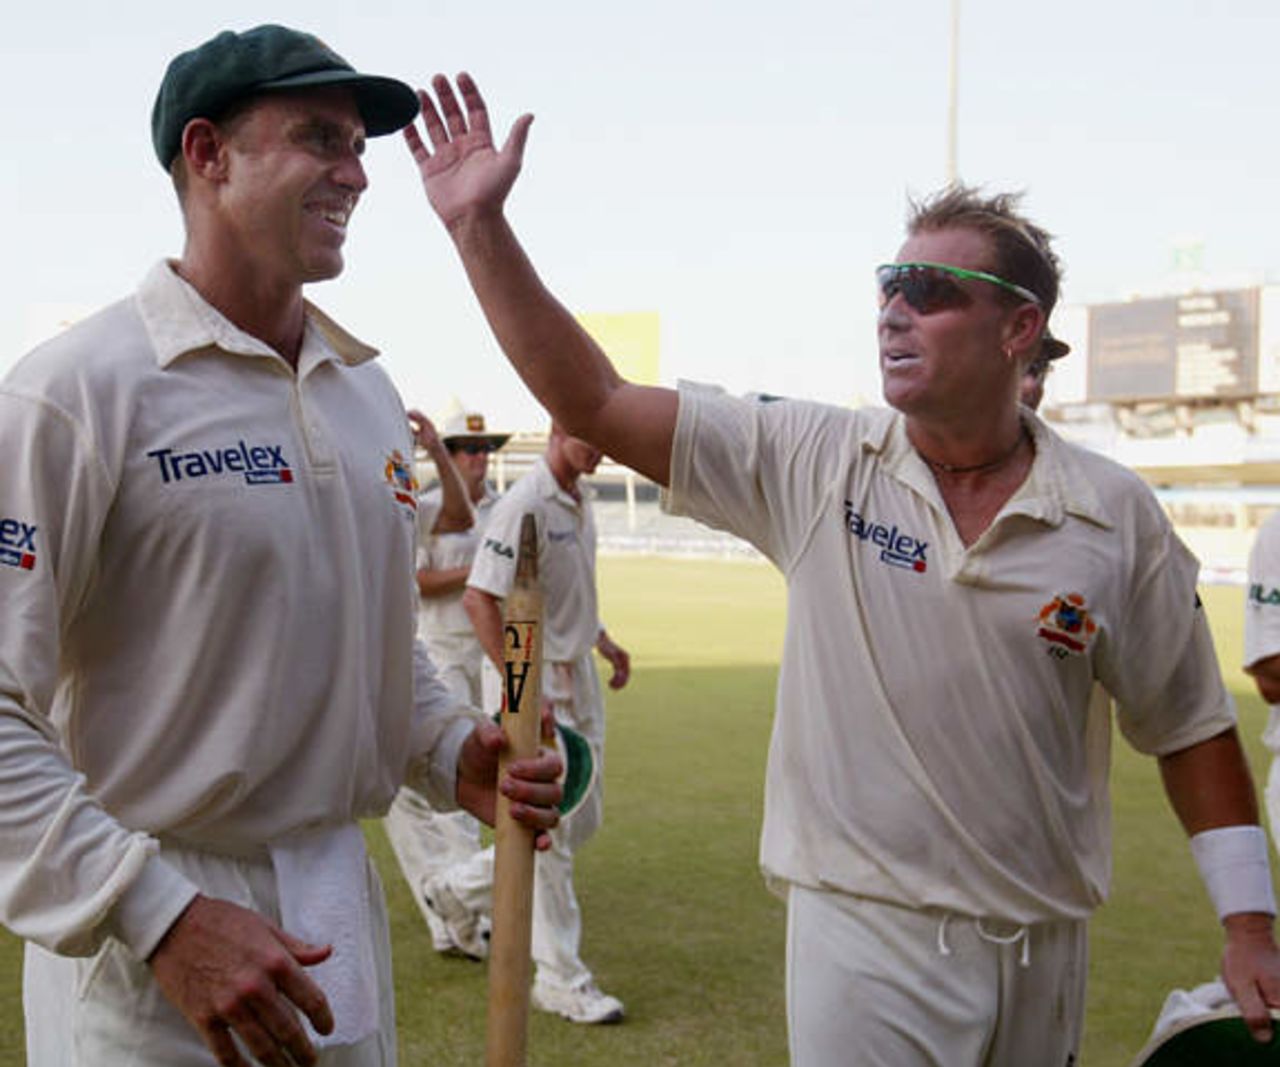 Australian spin bowler Shane Warne (R) celebrates winning the second cricket test match against Pakistan with high scoring batsman Matthew Hayden, carrying one of the stumps, at Sharjah's stadium October 12, 2002. Pakistan crumbled to defeat in less than two days of the second test against Australia on Saturday, adding just 53 to their first innings 59 and losing by an innings and 198 runs. Pakistan's match total of 112 was the fourth worst in test history.